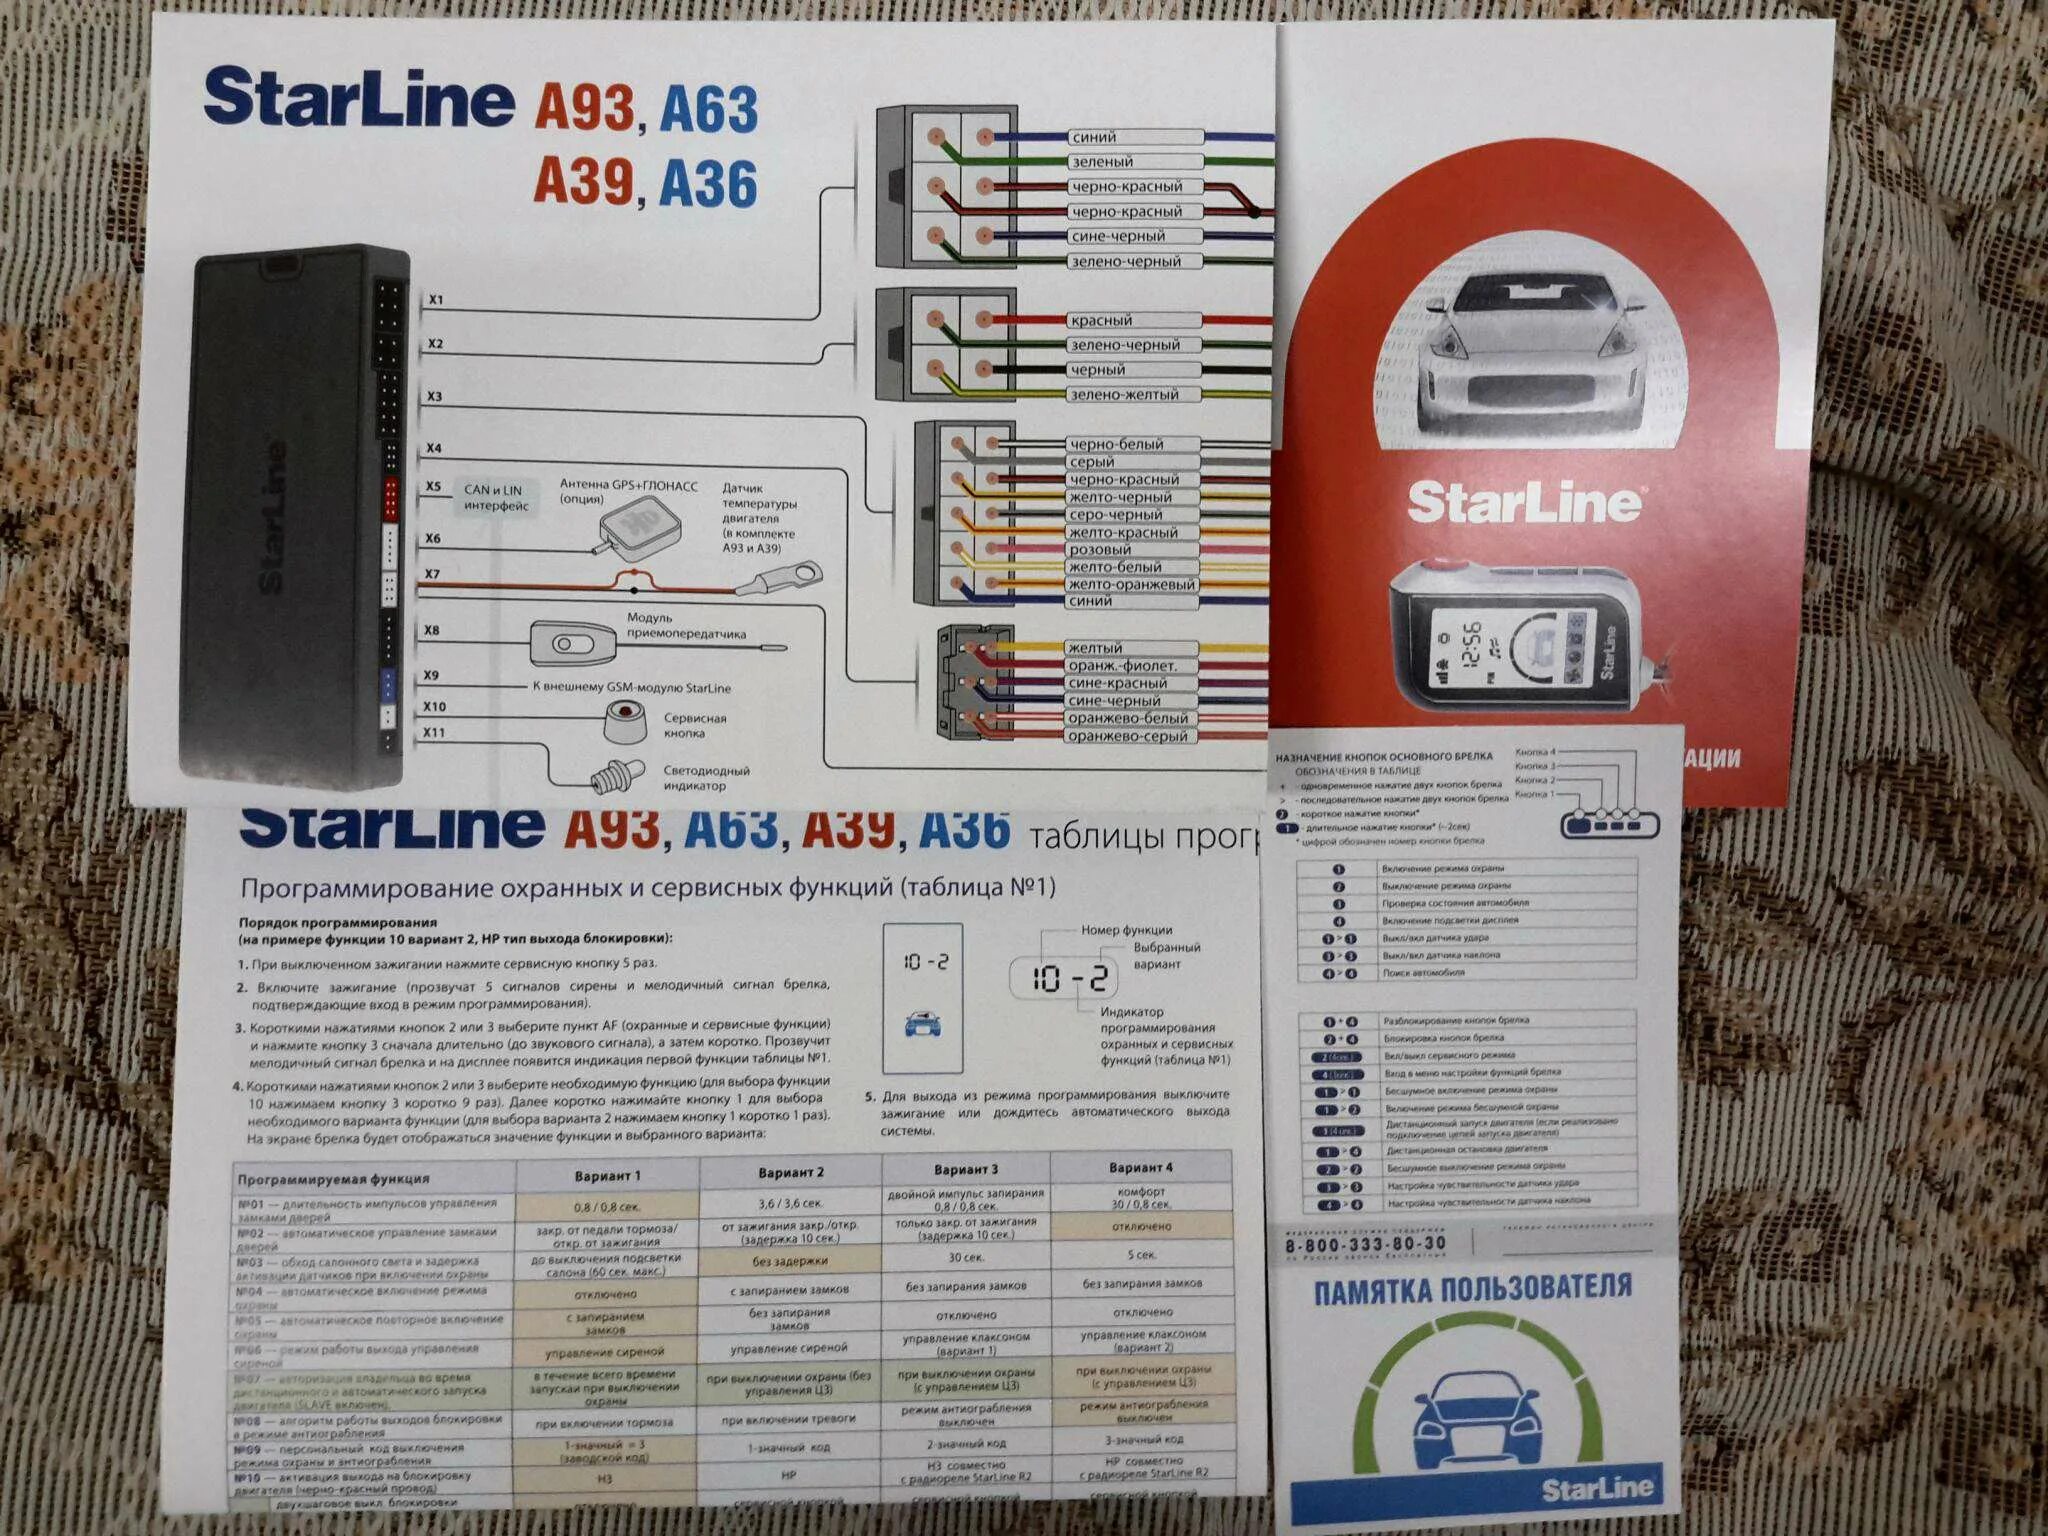 Автосигнализация starline a93 2can 2lin. Старлайн а93 2can 2lin Eco. A93 2can+2lin Eco. Сигнализация STARLINE a93 2can2lin Eco. Автосигнализация STARLINE a93 2can+2lin Eco.